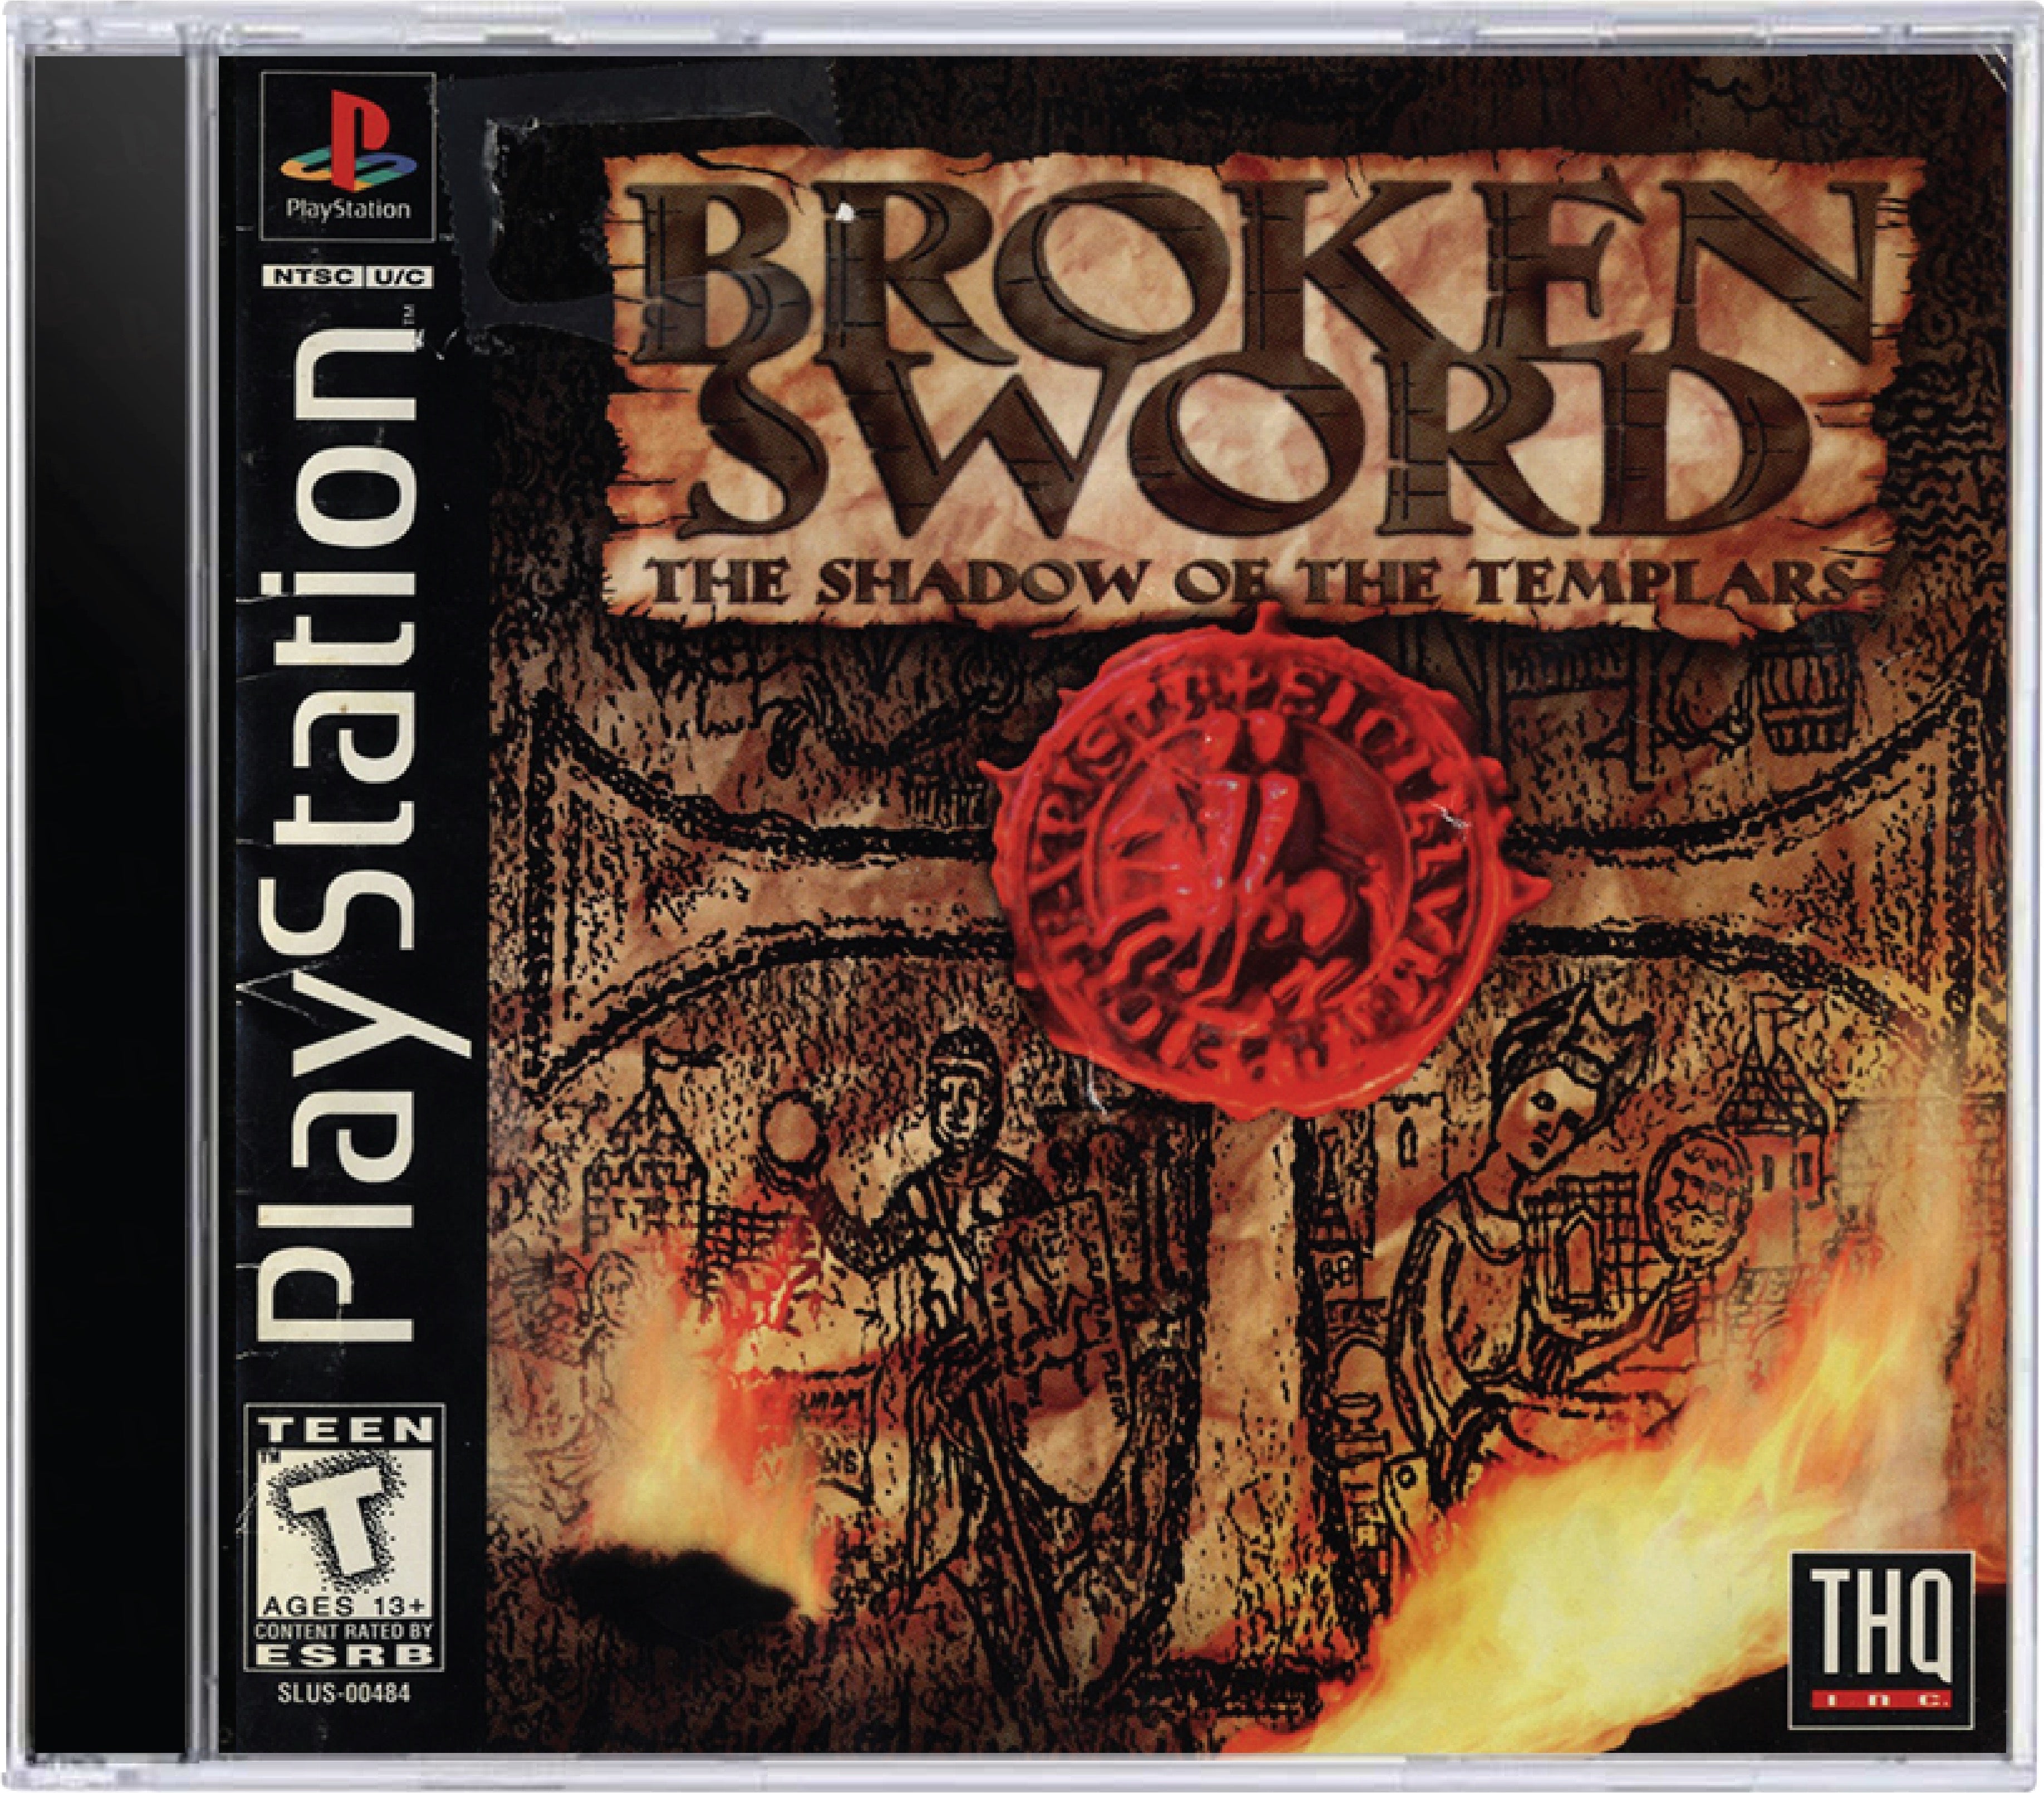 Broken Sword The Shadow of the Templars Cover Art and Product Photo